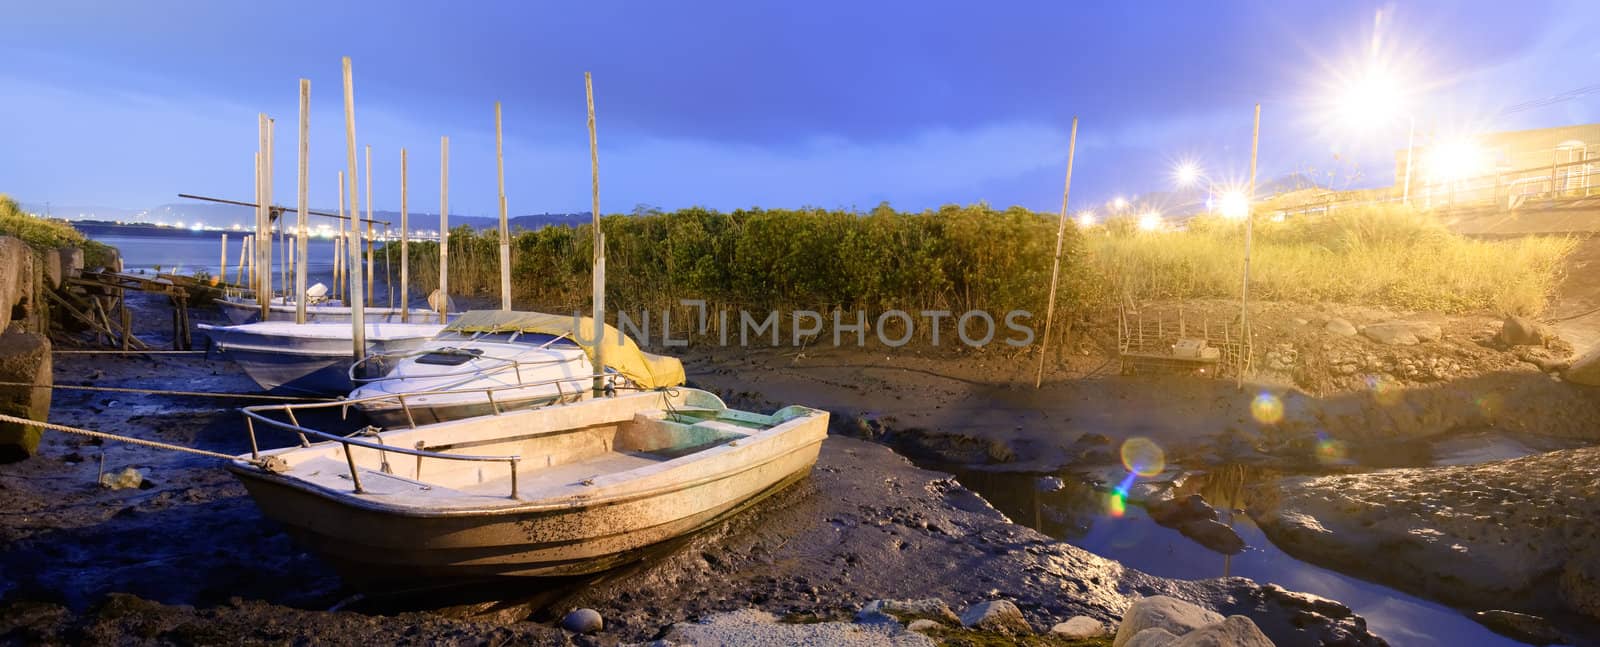 Discard boats on silt of river with city light flare in night.